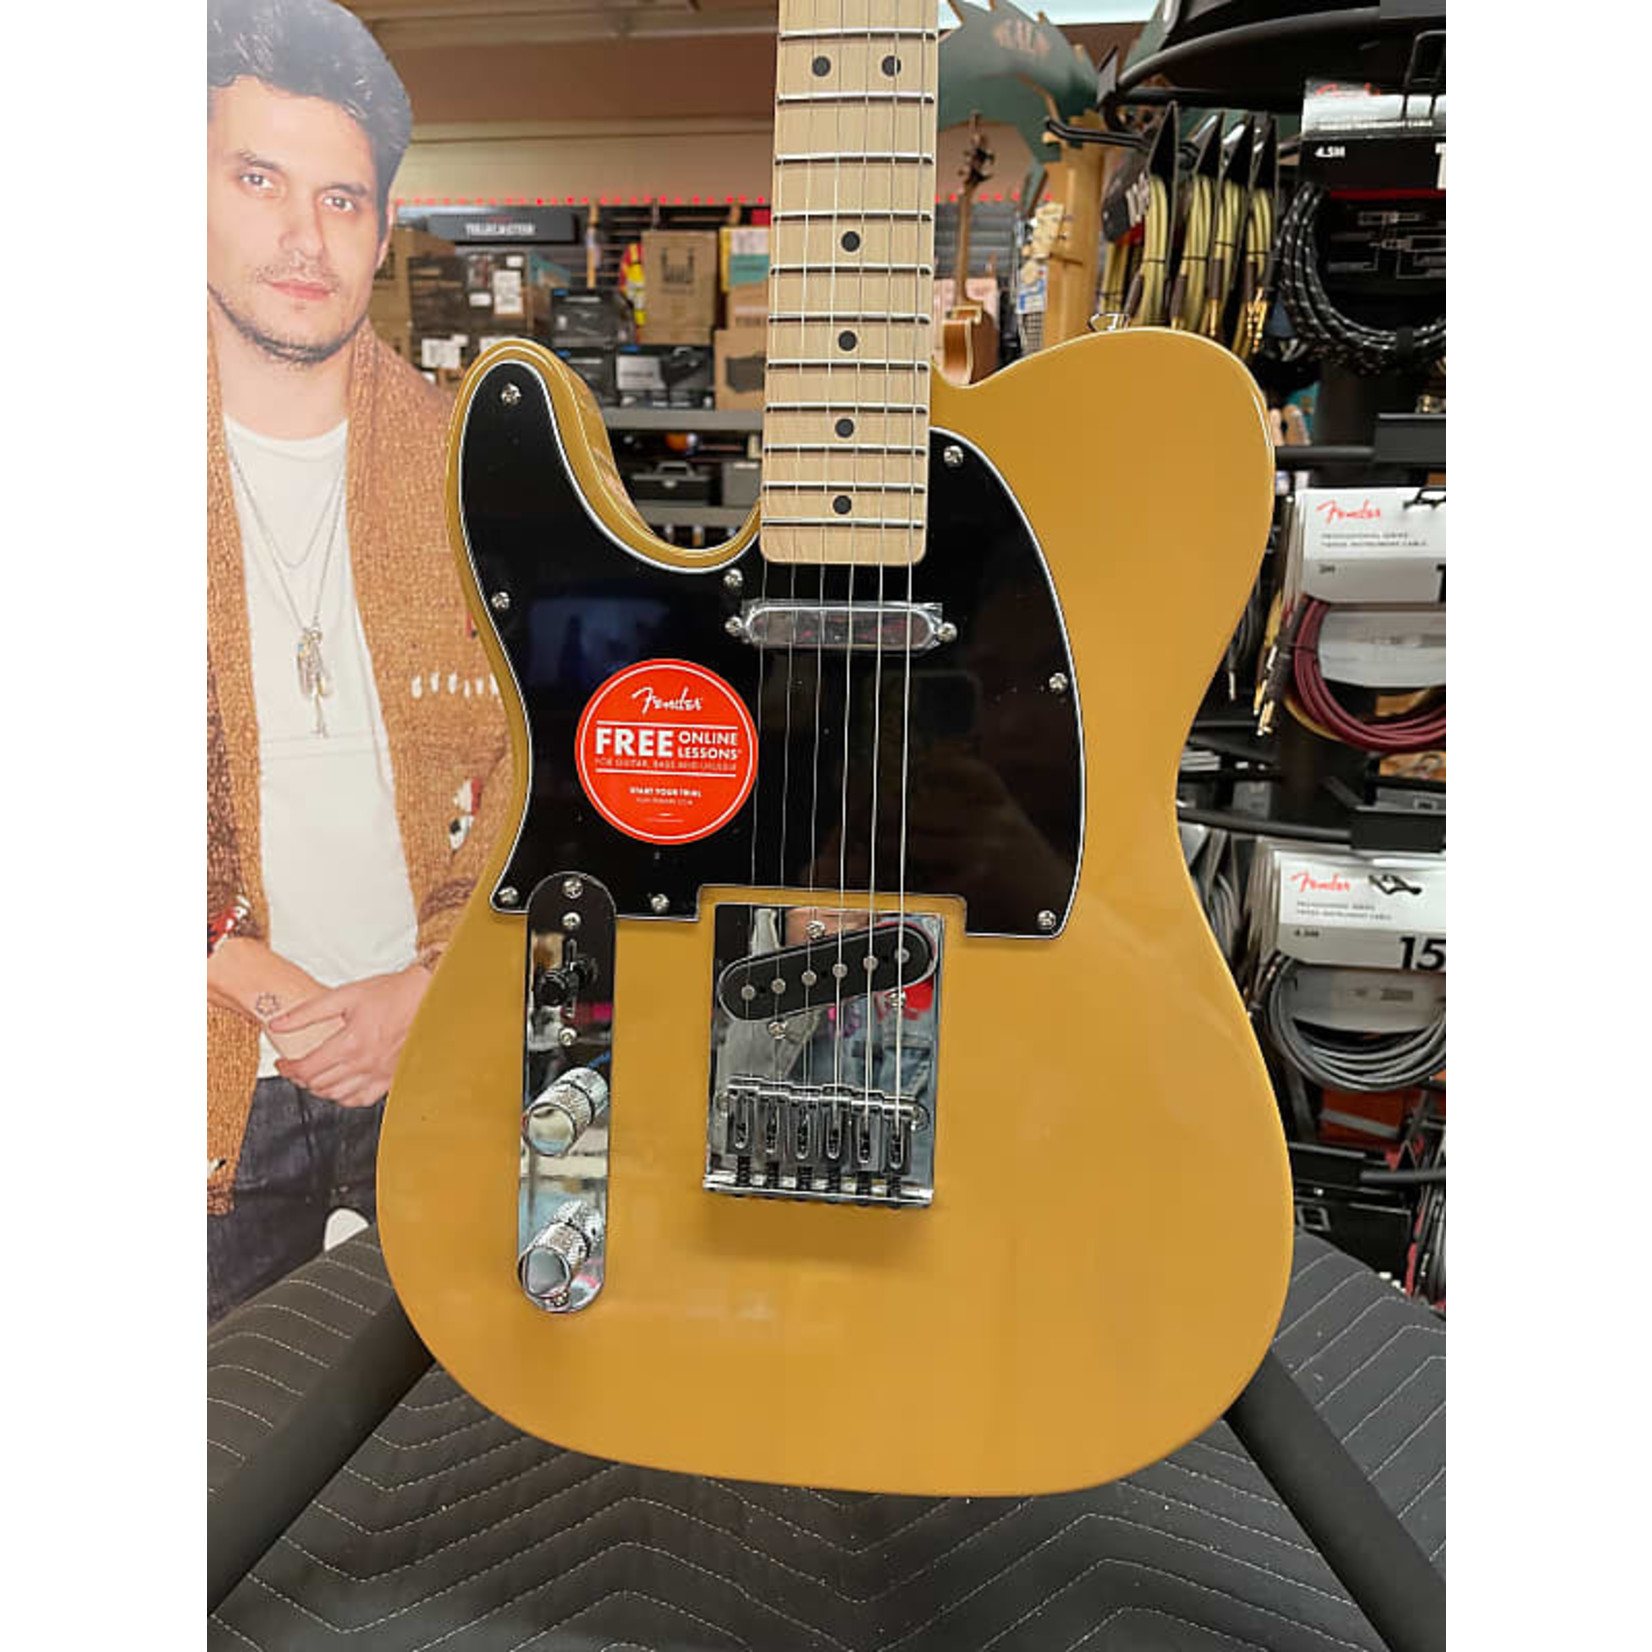 Squier ON SALE-Squier Affinity Series Telecaster Left-Handed- Butterscotch Blonde